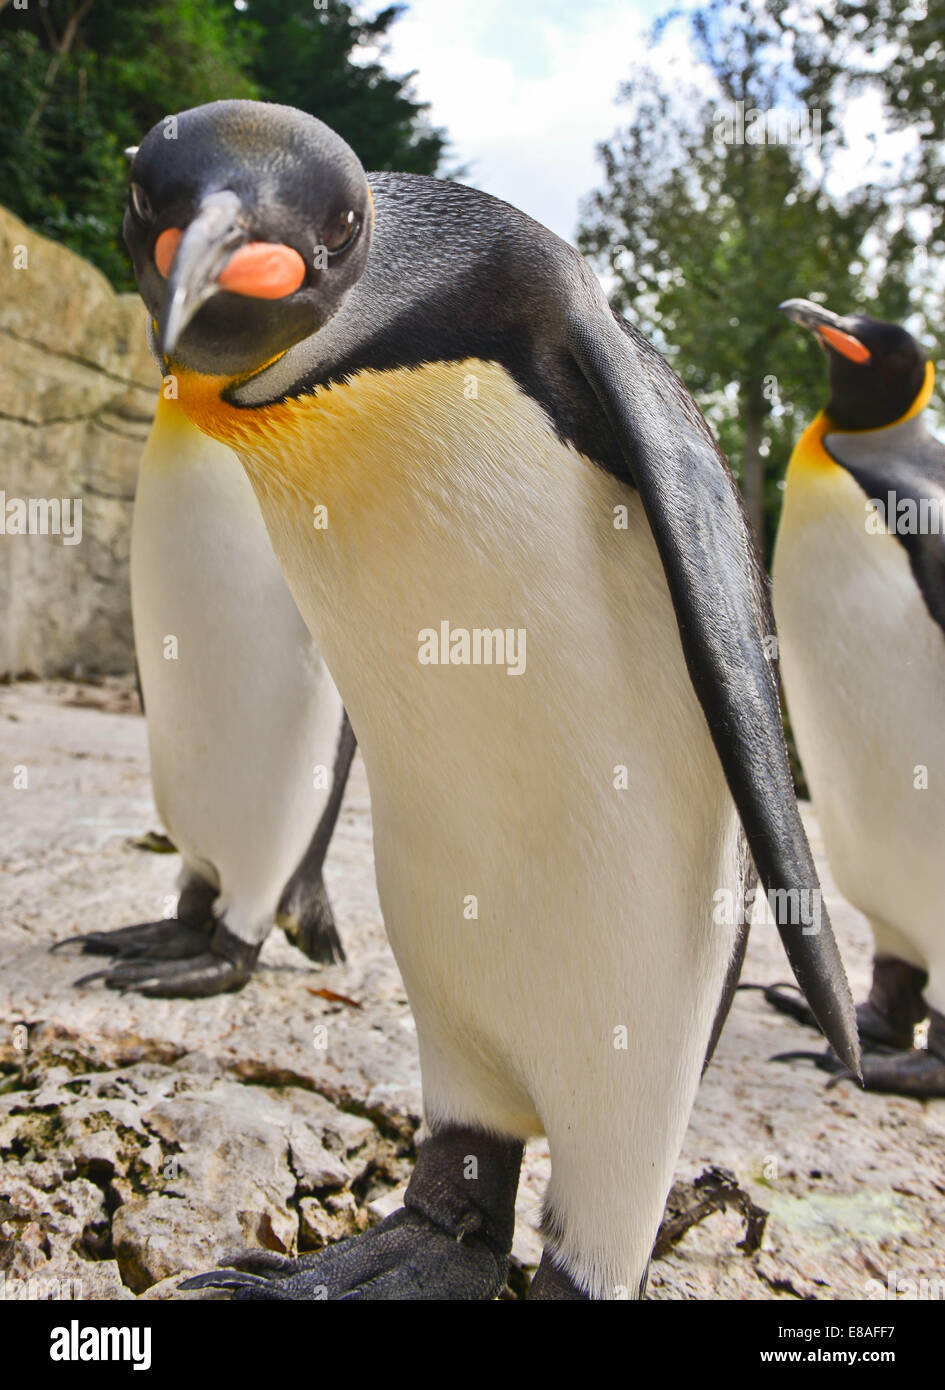 Picture By:Jules Annan Picture Shows:Birdland, Bourton on the Water ..., King Penguins, Birdland is  home to England’s only collection of King Penguins.and have supplied these birds for the Batman film Date:  02/10/2014 Stock Photo